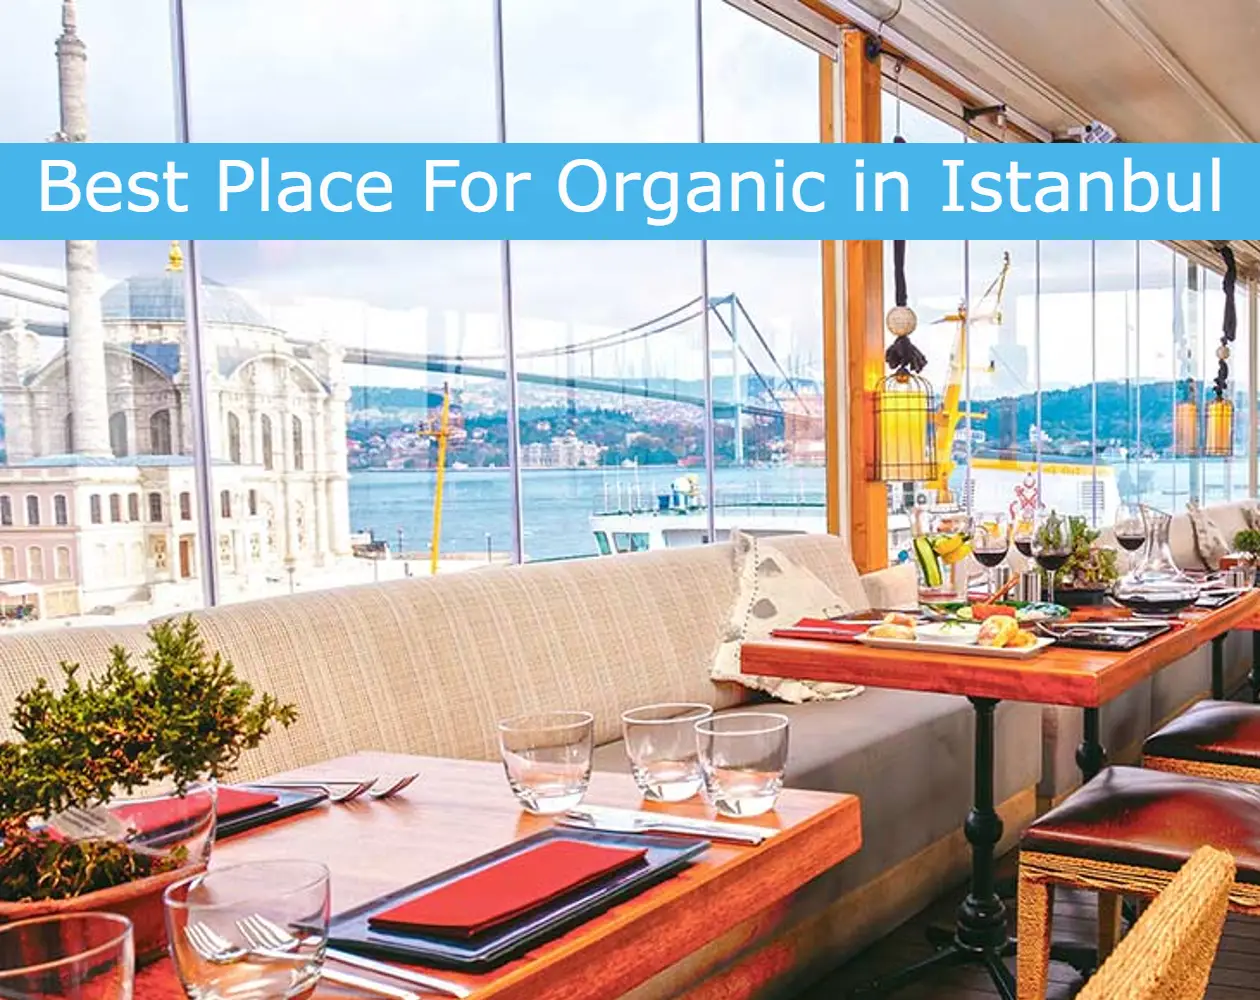 Best Place For Organic in Istanbul